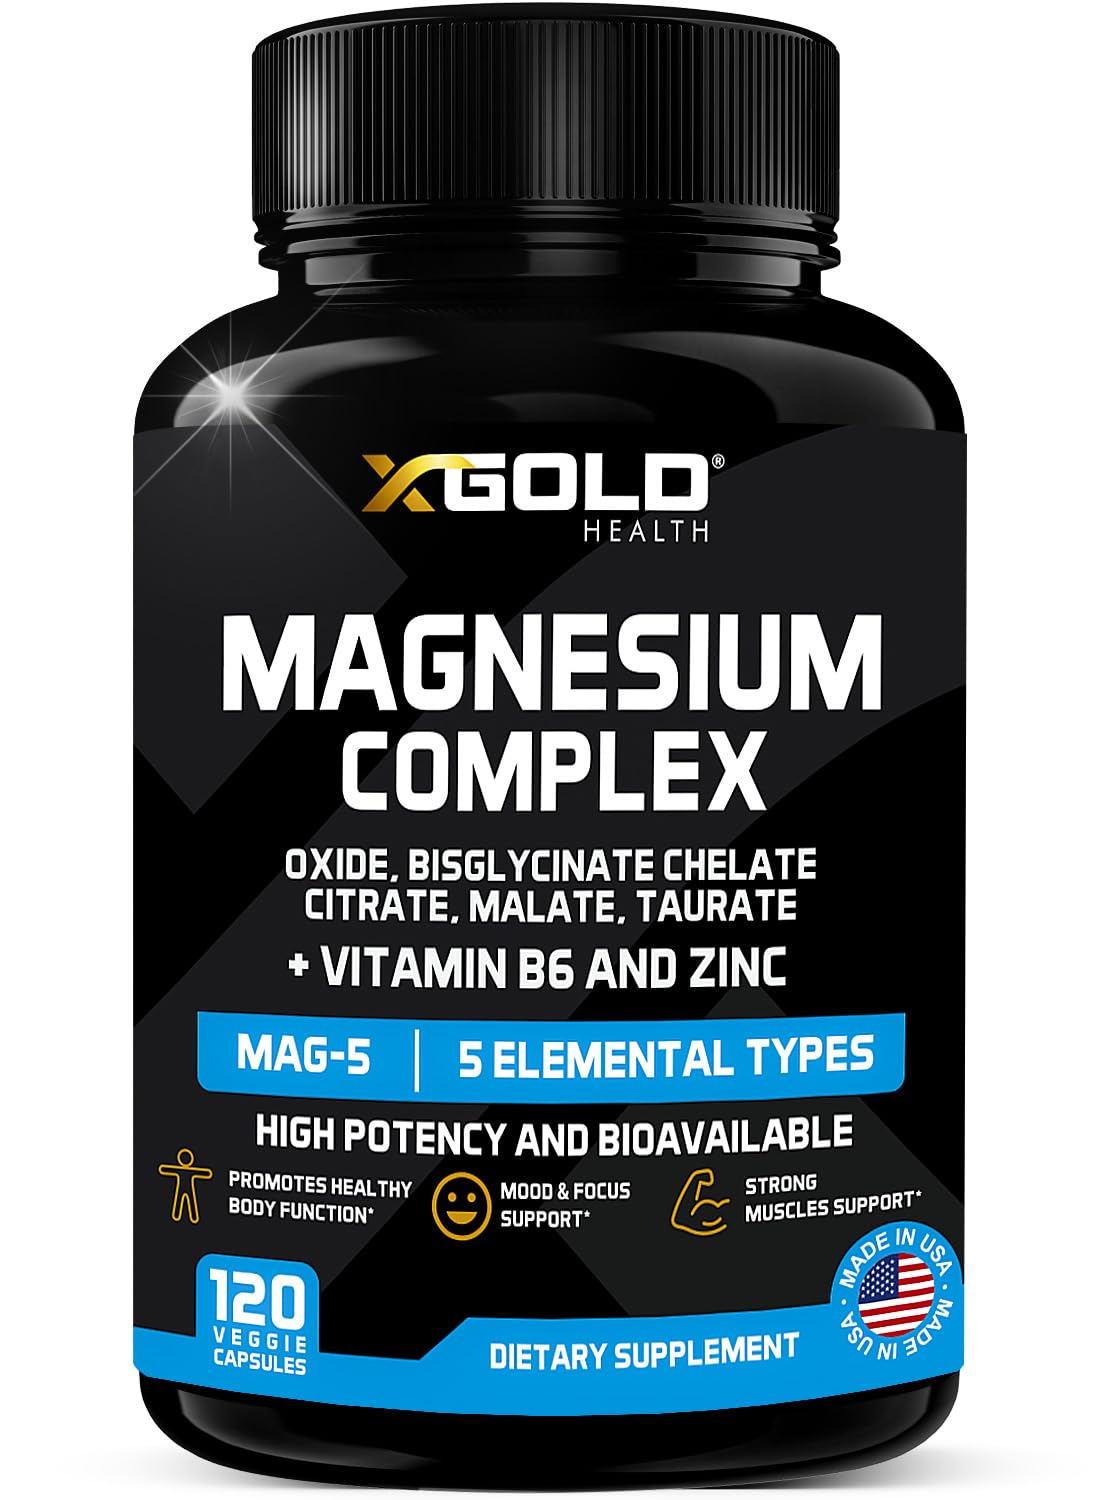 Magnesium Complex 500mg with Vitamin B6 & Zinc Supplement| Mag Complex - 5 in 1 with Magnesium Oxide, Bisglycinate Chelate, Citrate, Malate & Taurate | Blend for Optimal Health |120 Caps Made in USA